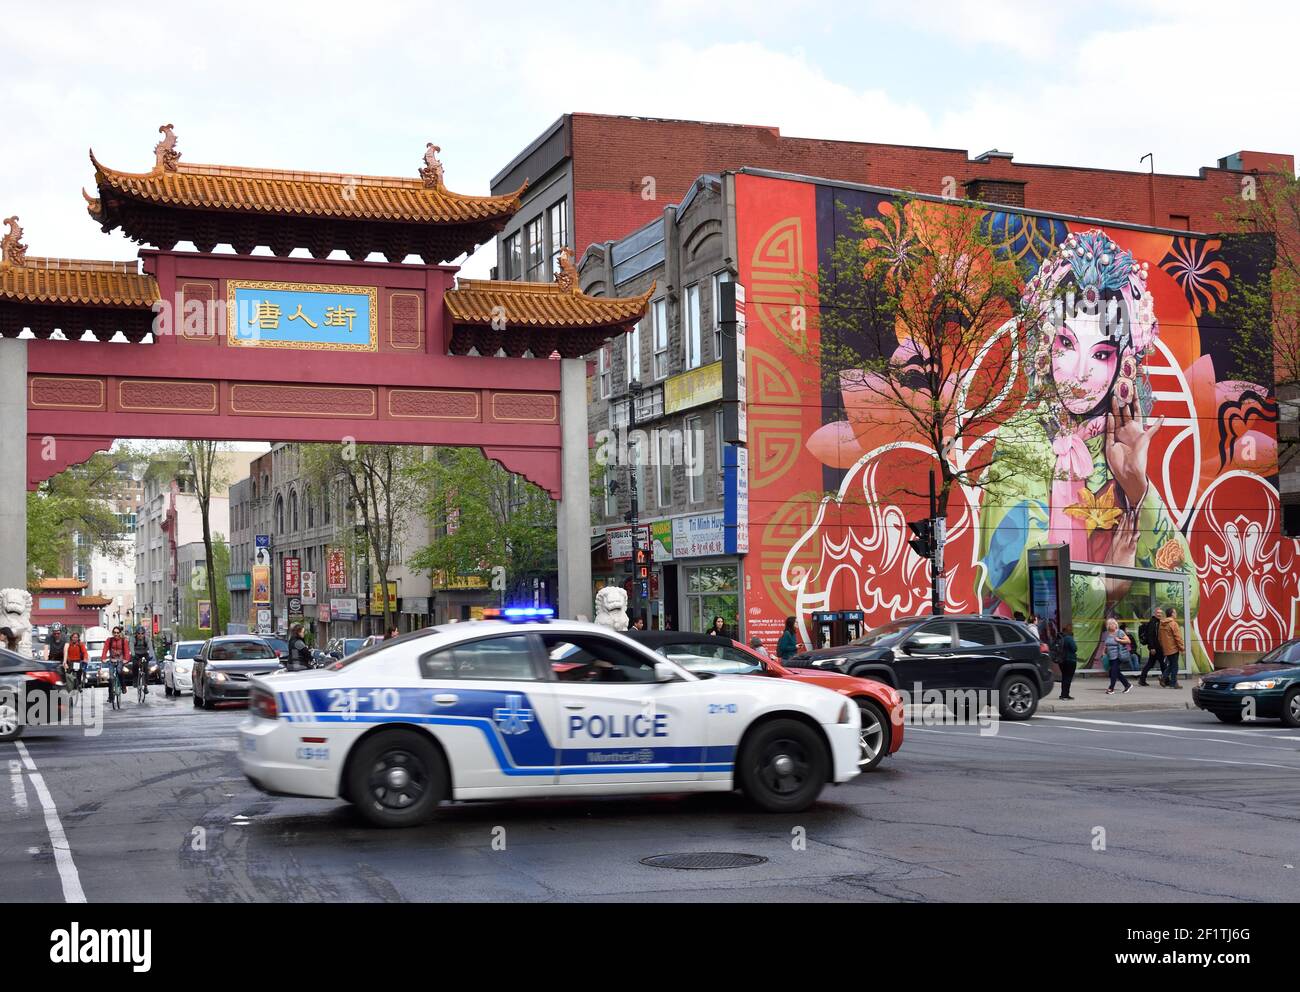 The Chinese arch gate, mural, people and traffic at the entrance of China town on st Laurent street in Montreal, Town, Canada, Canadian, Province, Quebec. Stock Photo